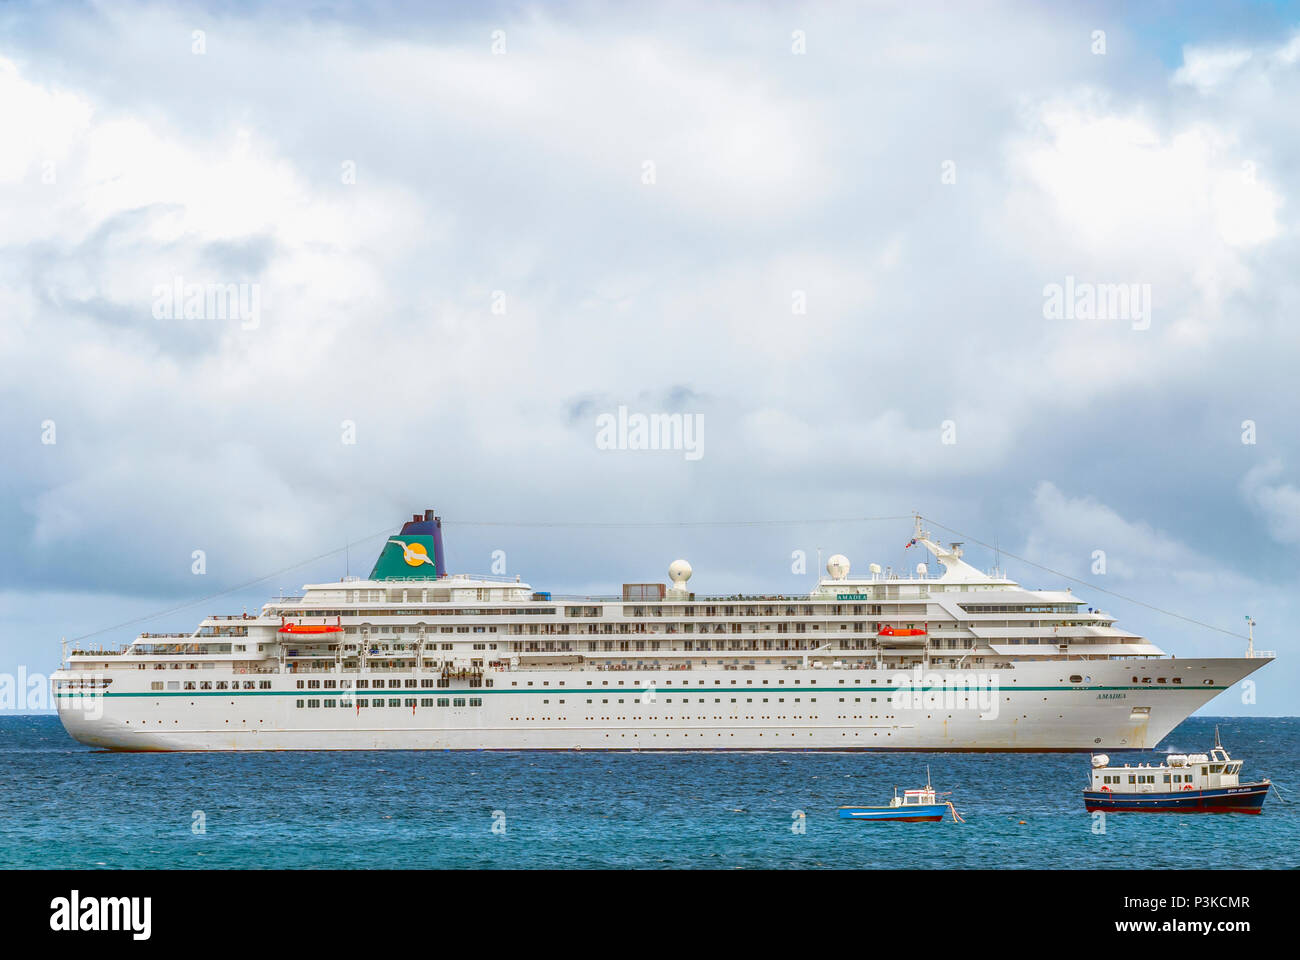 Cruise ship MV Amadea anchored at Georgetown, Ascension Island, West Africa Stock Photo